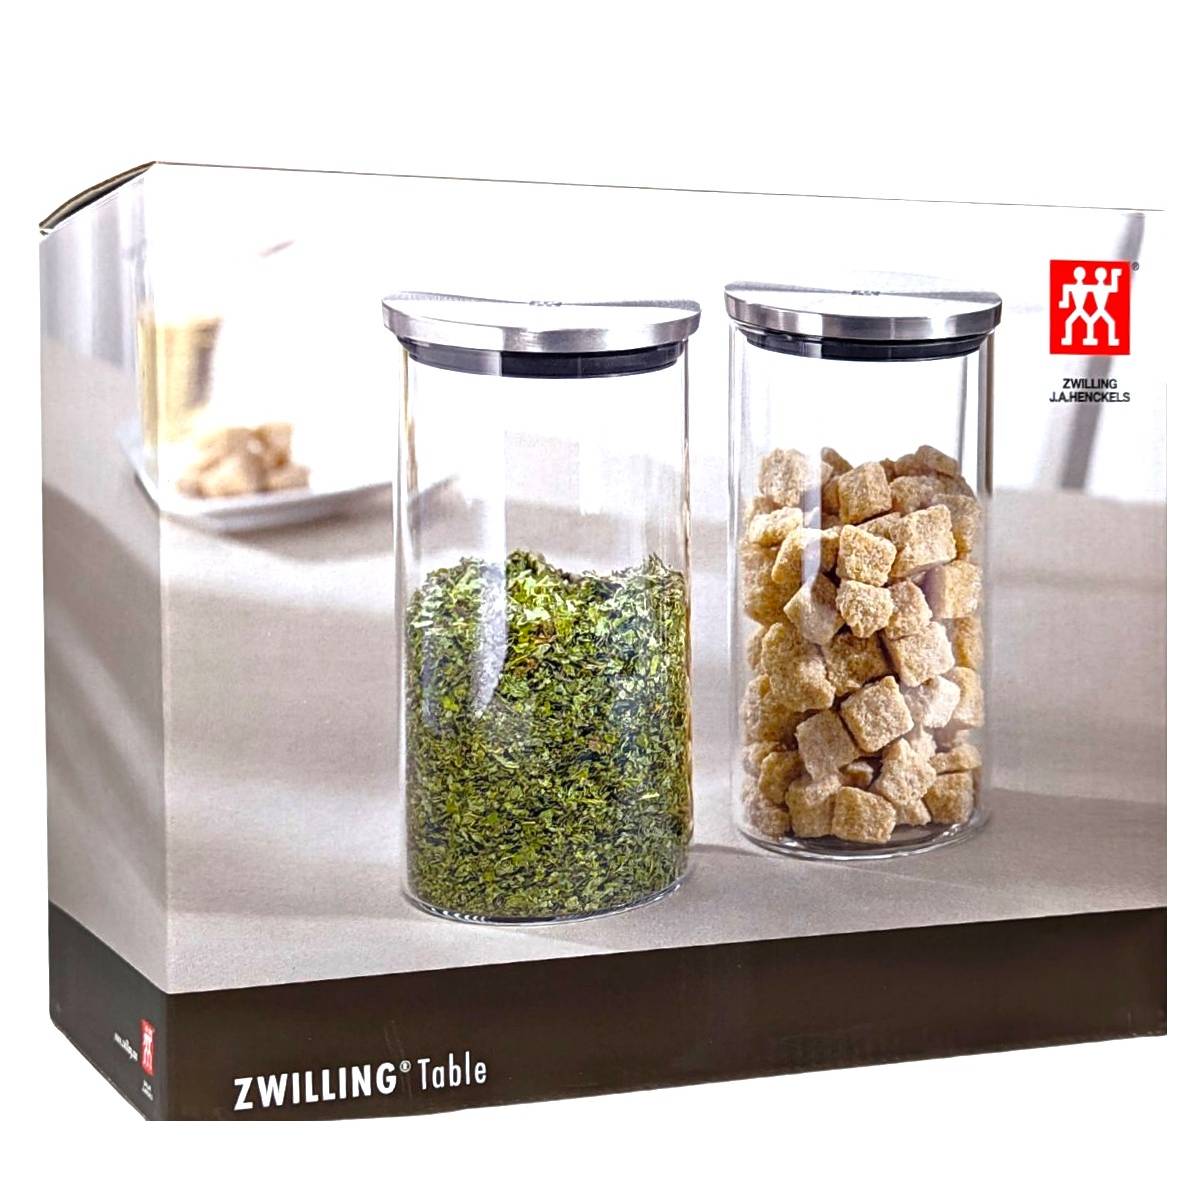 https://www.maxxidiscount.com/31995-thickbox_default/set-of-2-zwilling-table-glass-storage-canisters.jpg